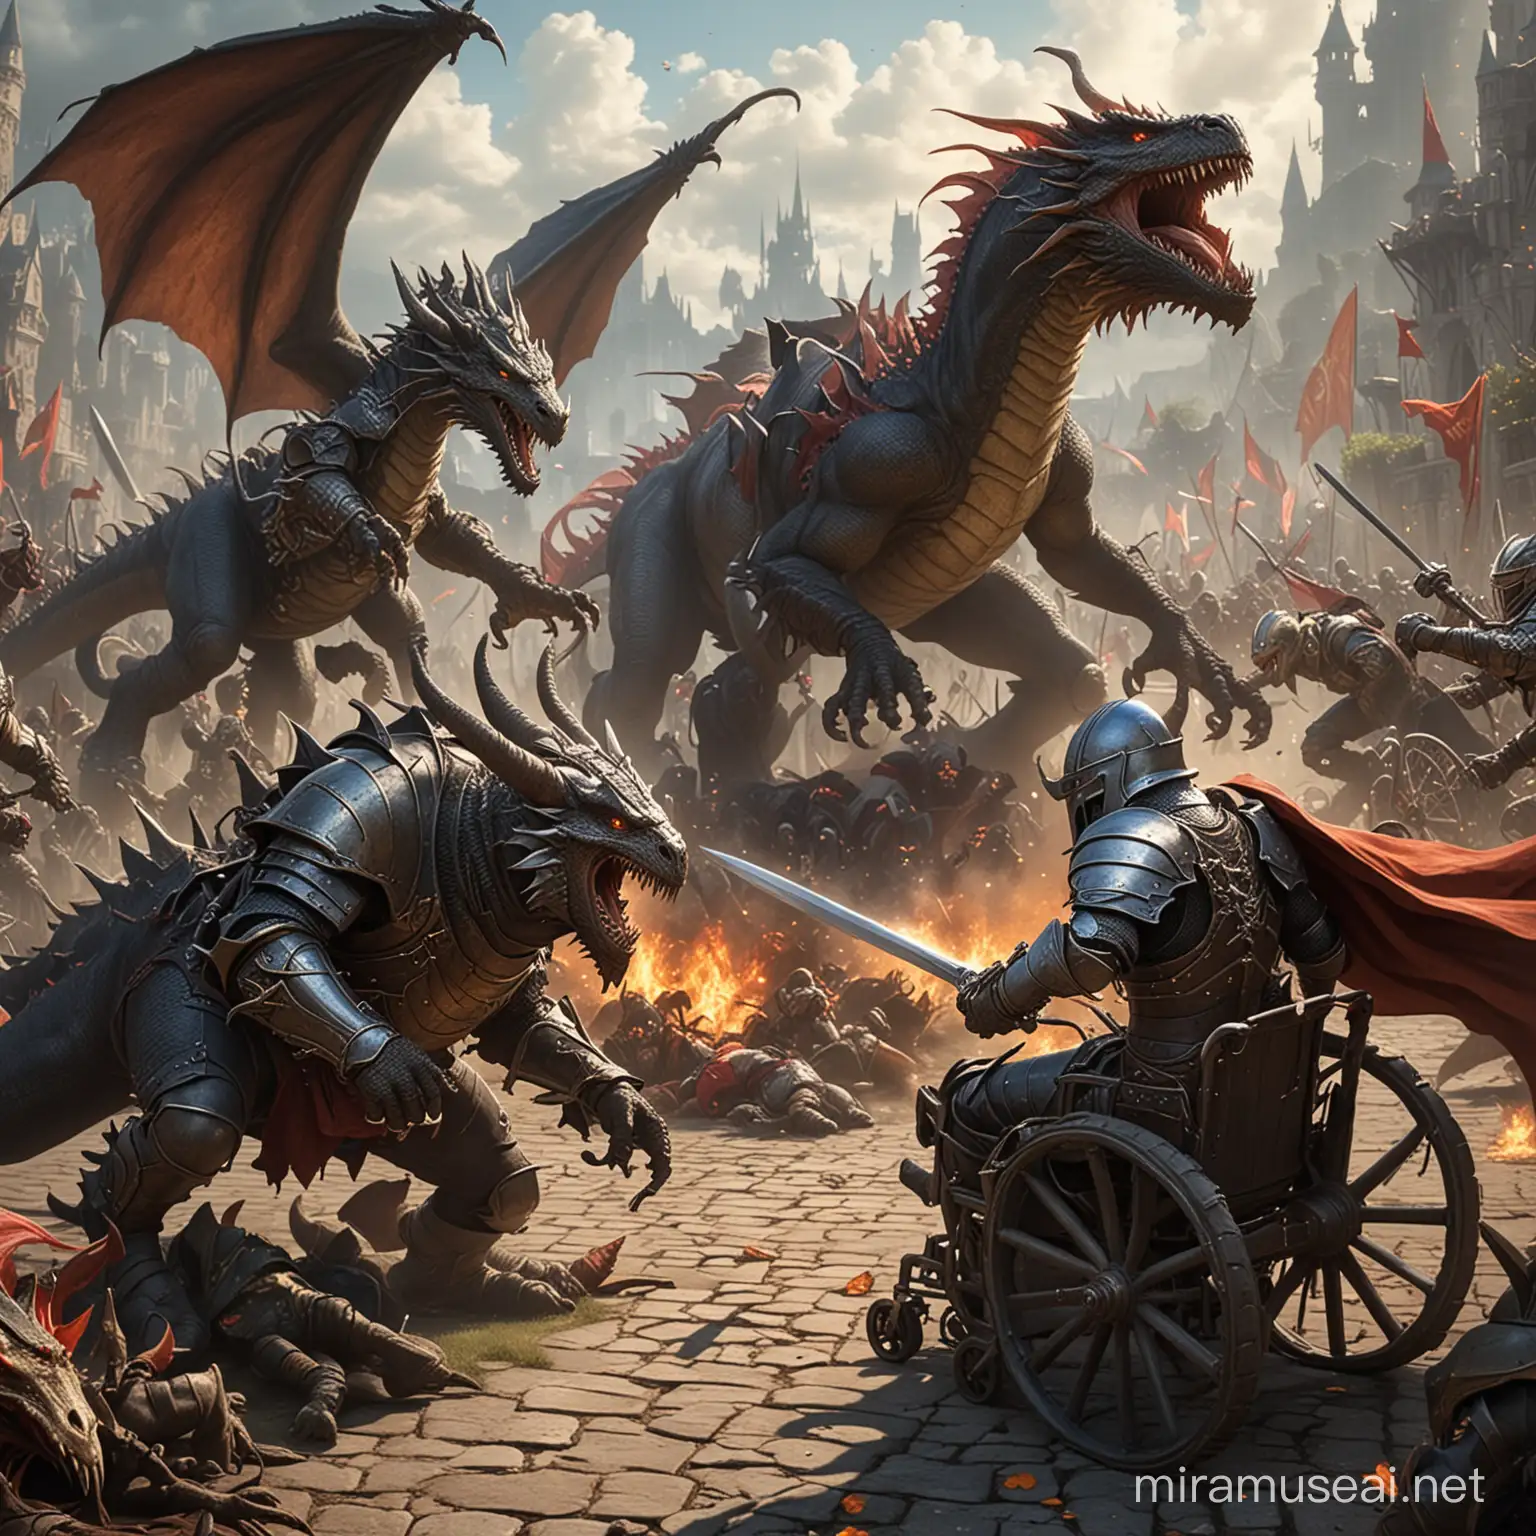 Epic Battle Knights Dueling in Wheelchairs Amidst Dragons and Goblins